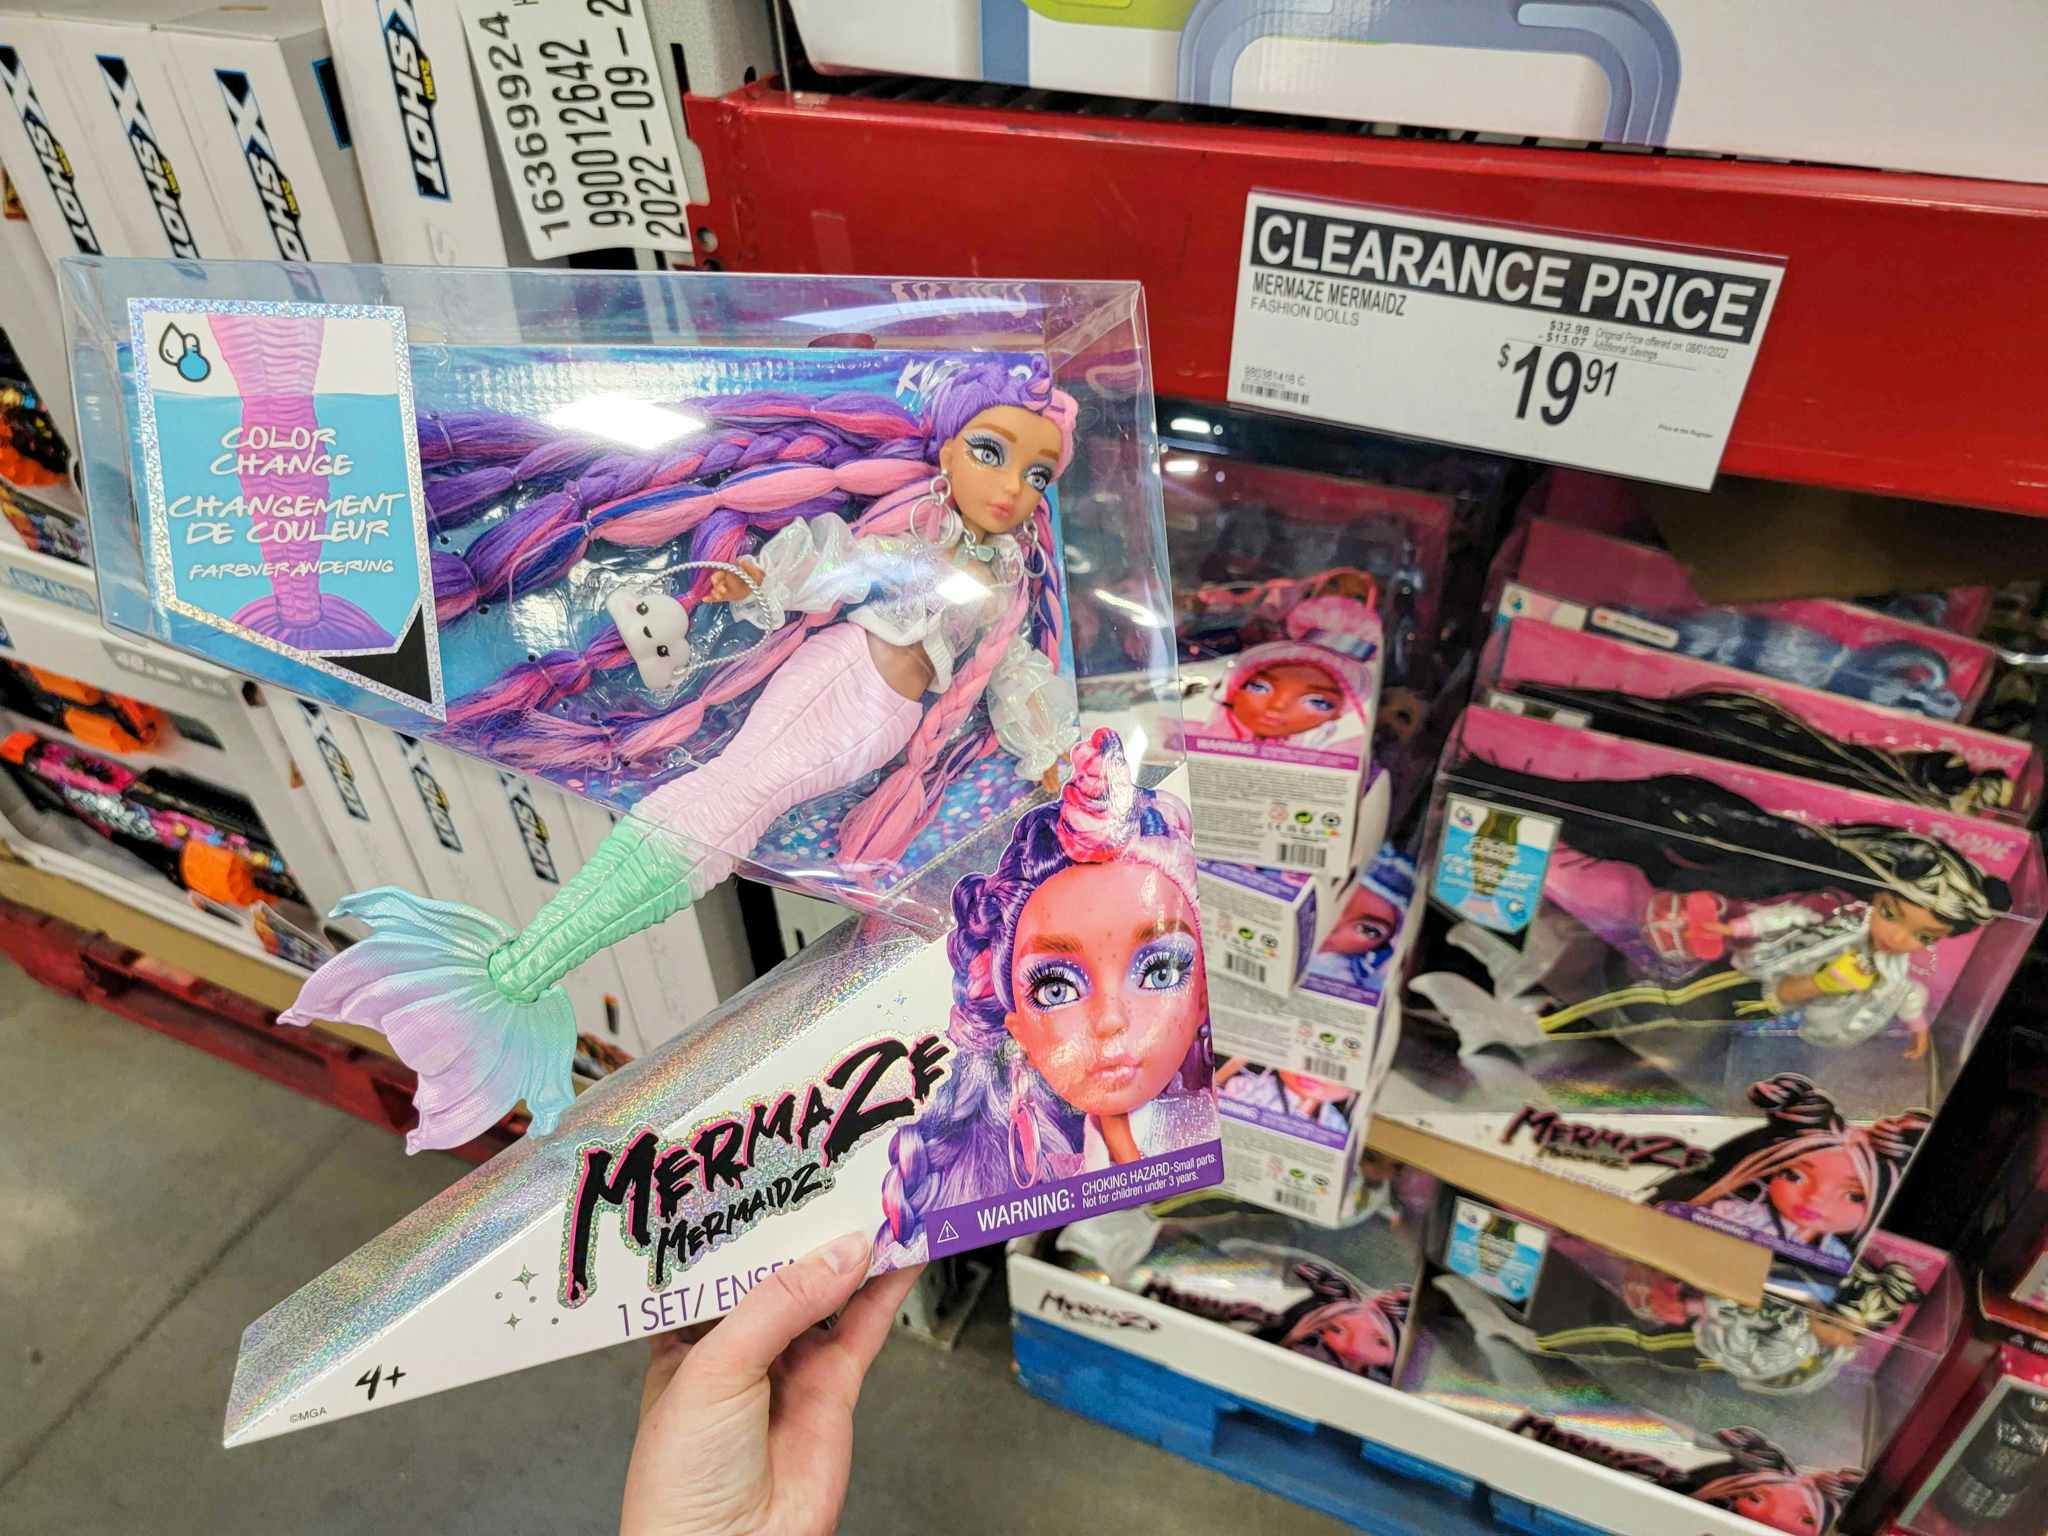 hand holding a mermaidz doll by the 19.91 clearance sign